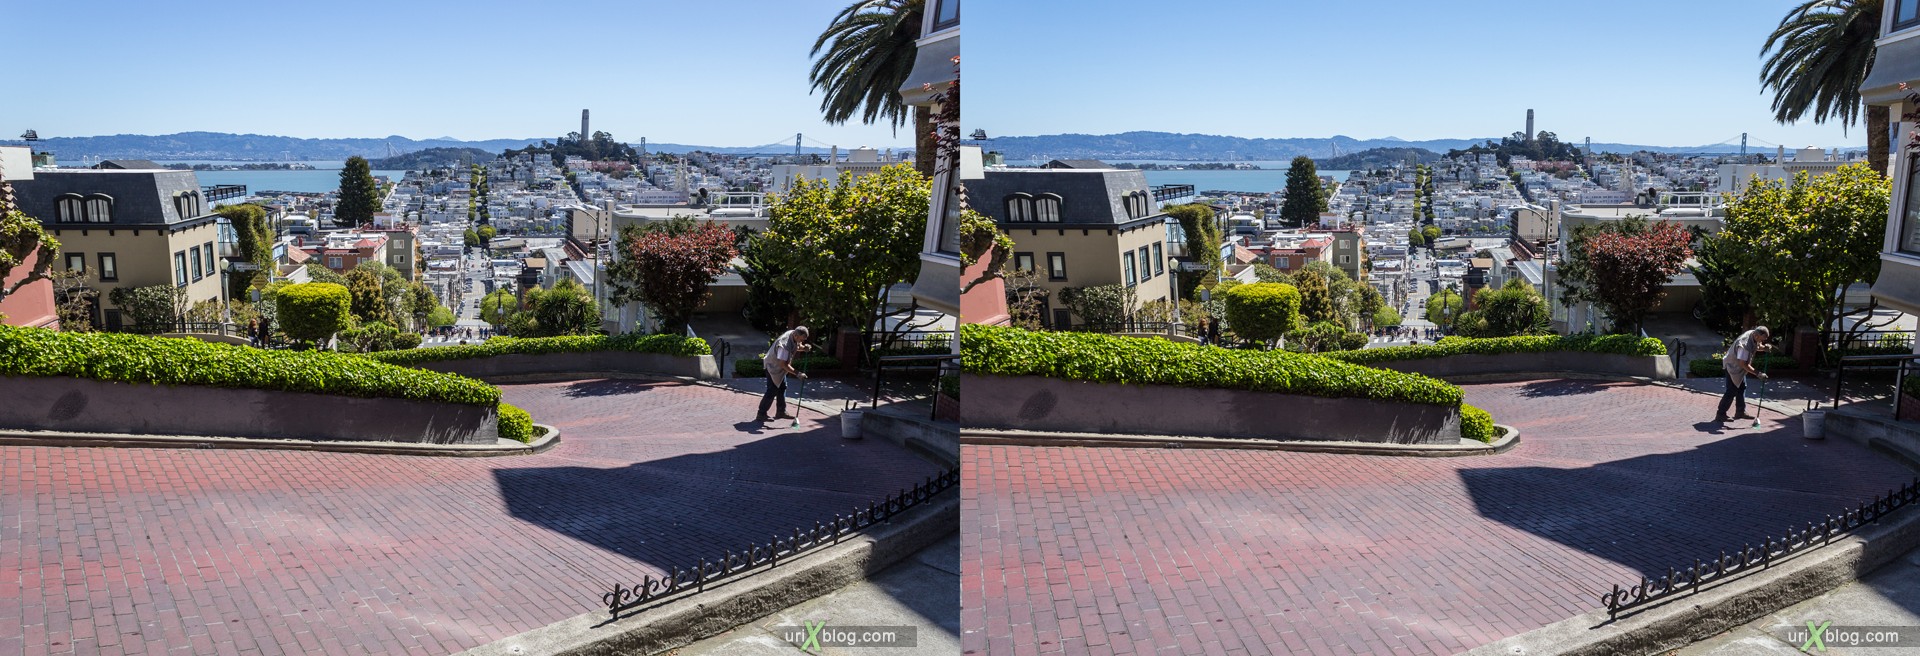 2013, USA, California, San Francisco, Russian hill, Lombard street, 3D, stereo pair, cross-eyed, crossview, cross view stereo pair, stereoscopic